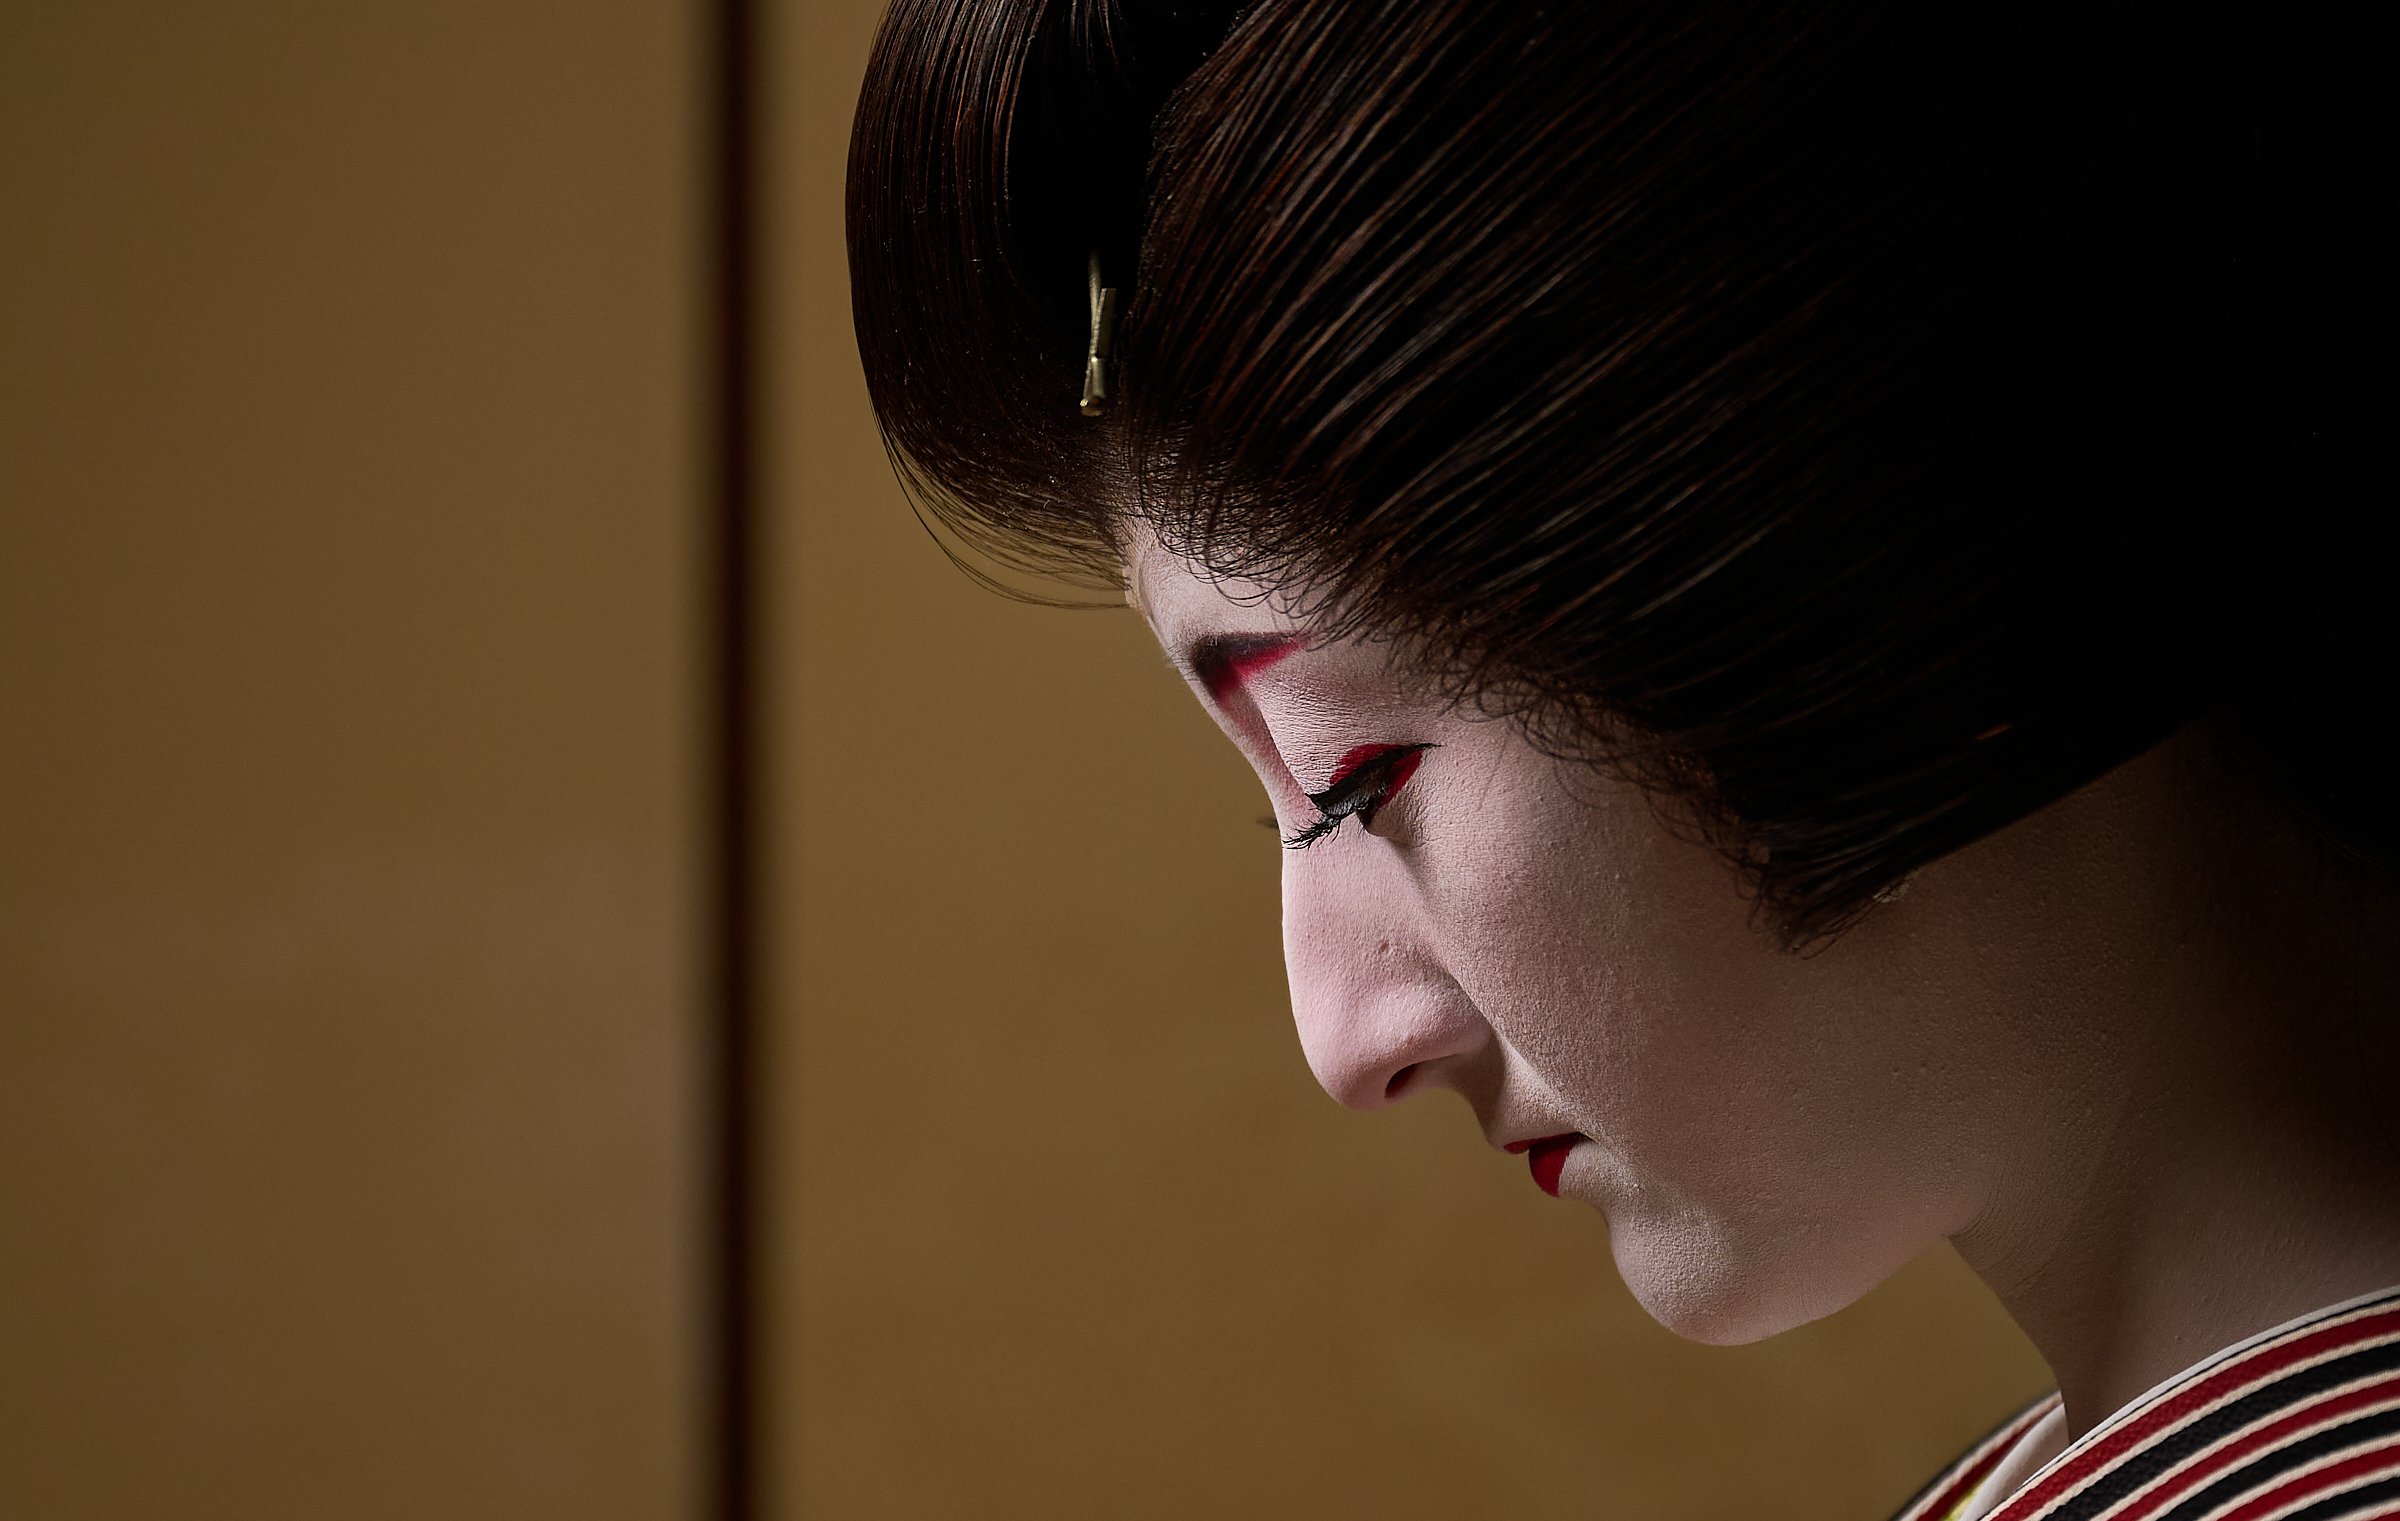 While geishas are known for providing laughter and happiness, there's a lot of spirituality involved in the profession